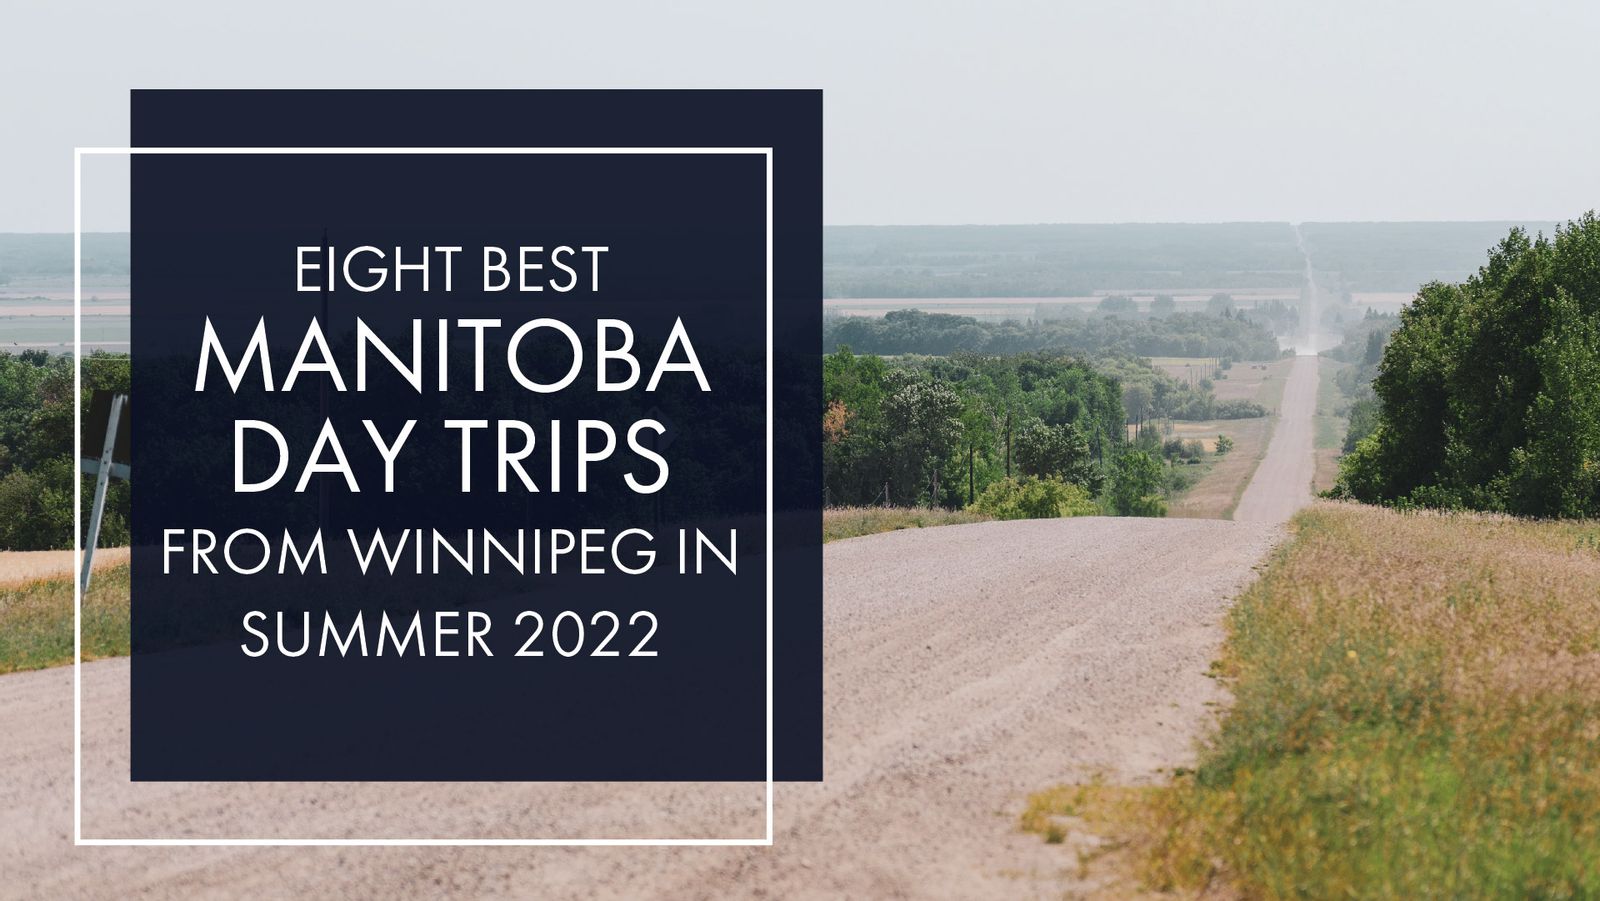 The Eight Best Manitoba Day Trips from Winnipeg in 2022